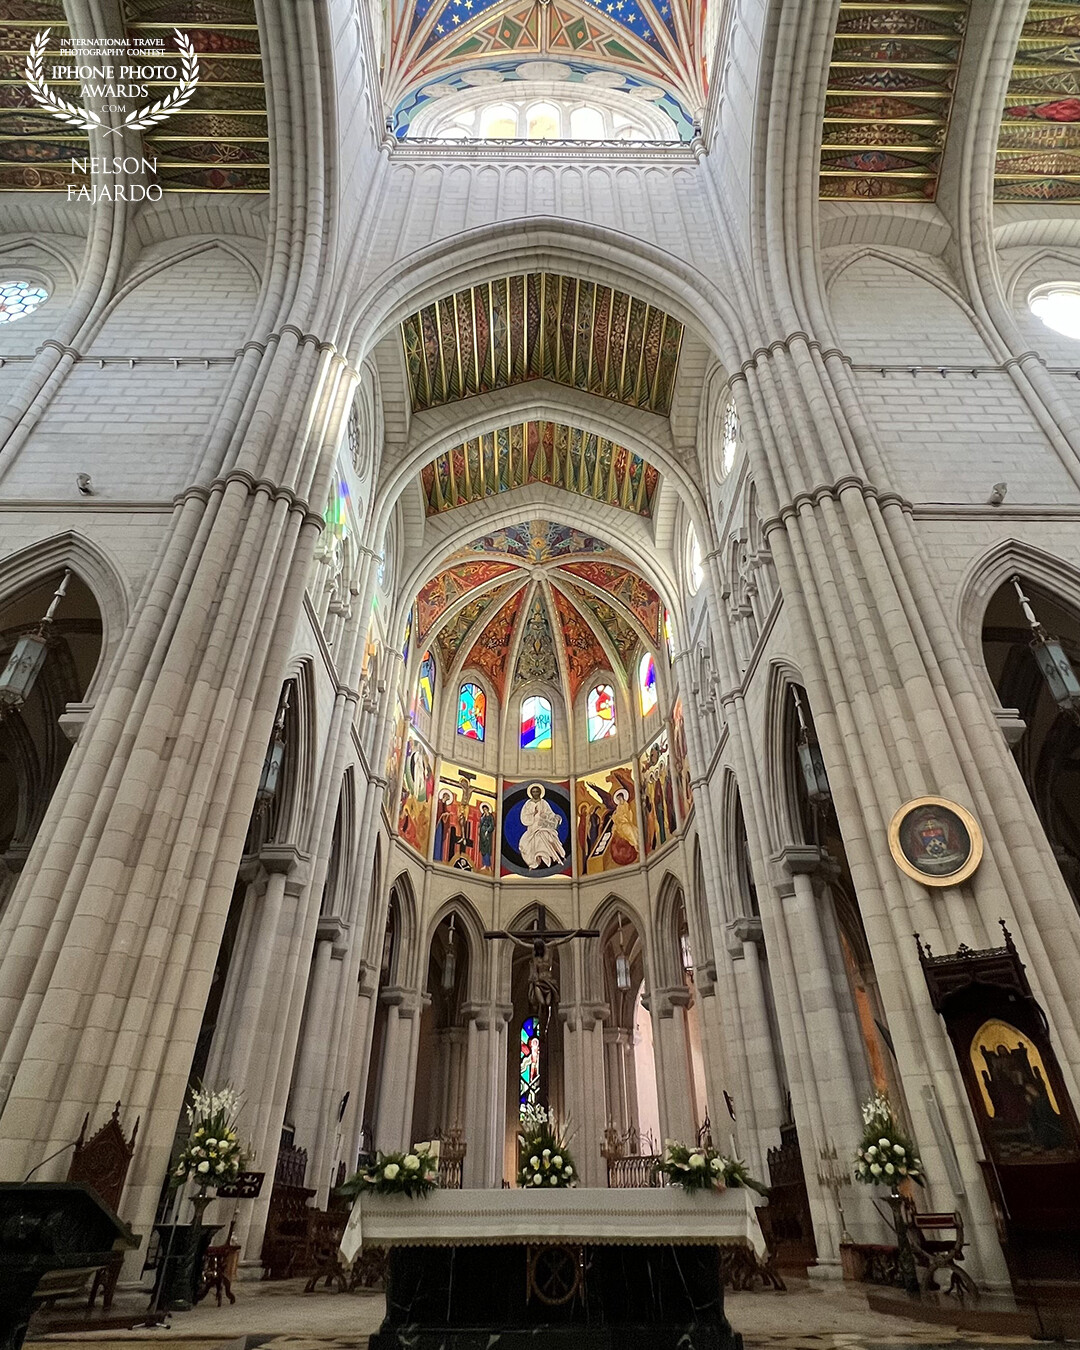 Inside the Almudena Cathedral showcasing the beautiful and colorful ceilings and windows.